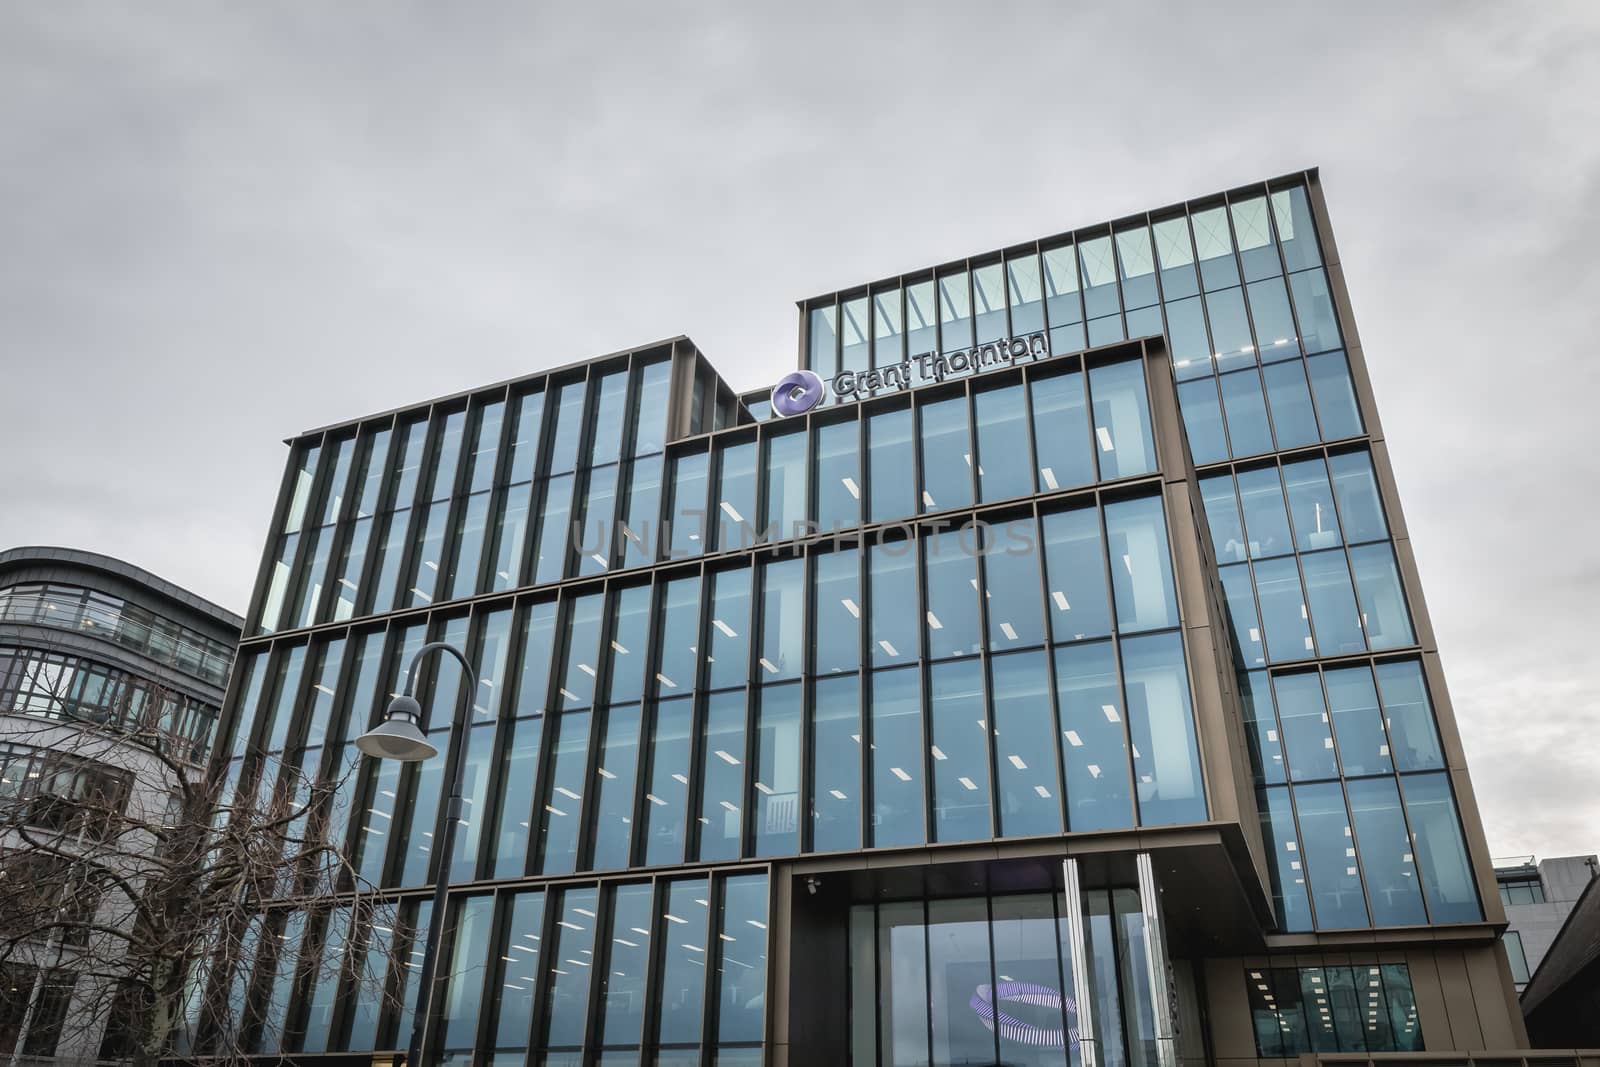 Dublin, Ireland - February 12, 2019: Architecture detail of the Grant Thornton International Tower, an audit, consulting and financial advisory group on a winter day